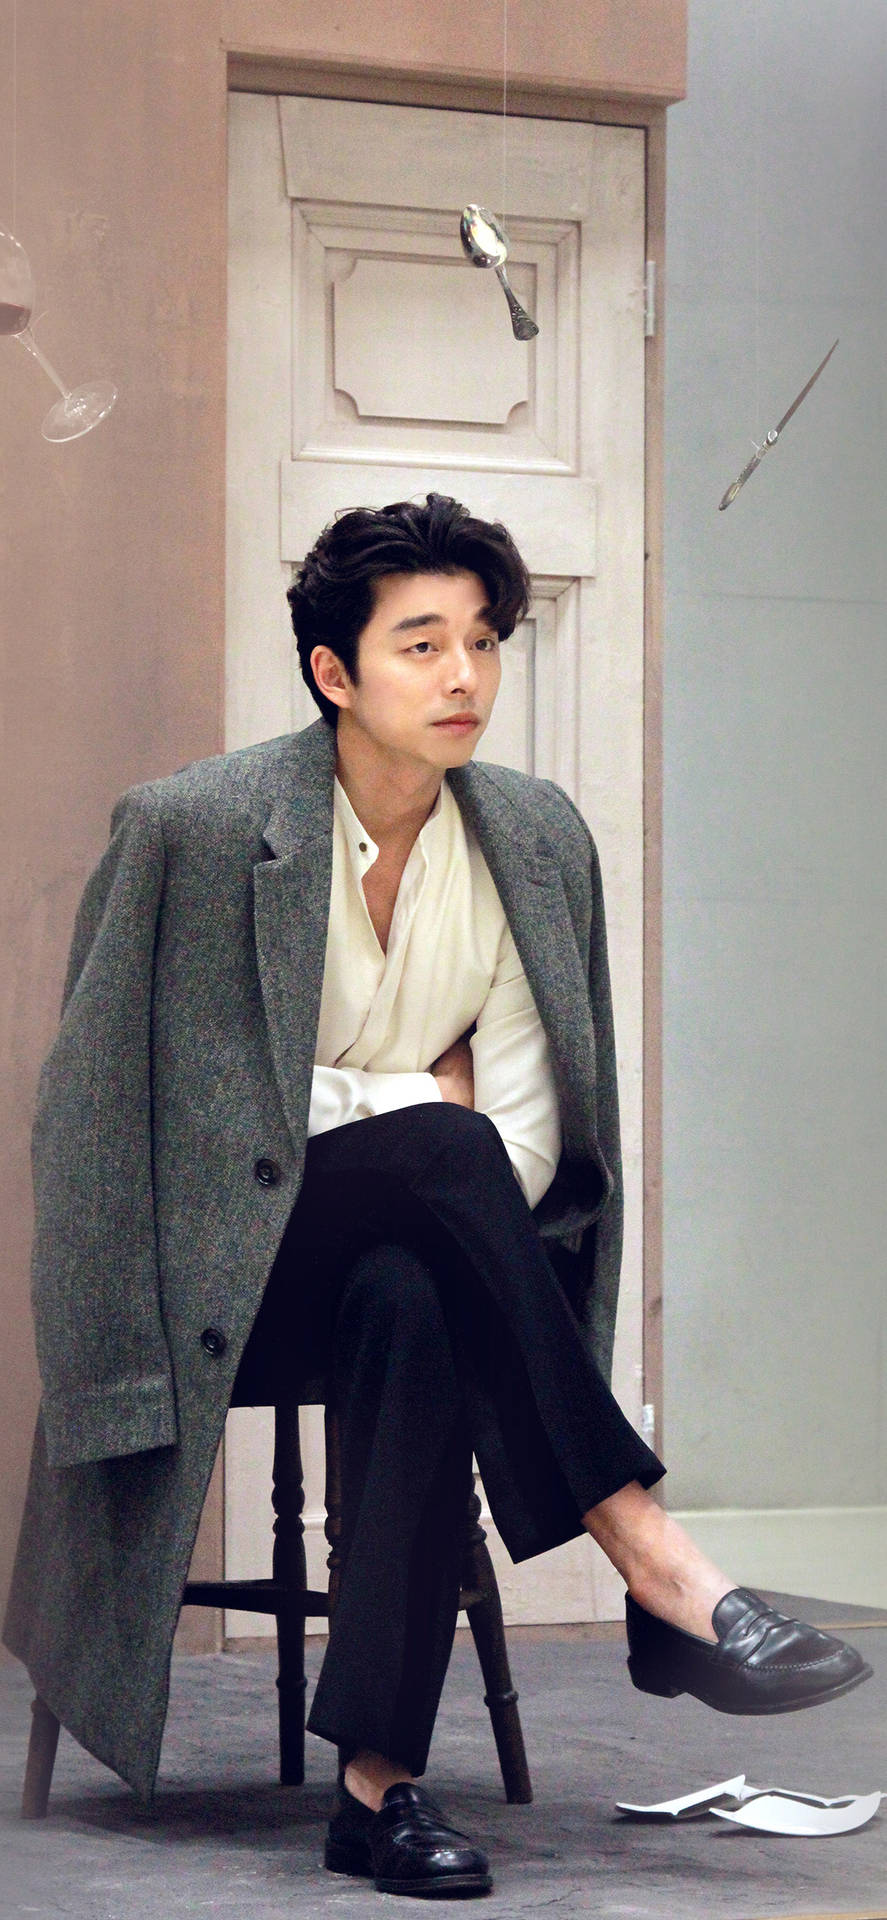 Enigmatic Portrait Of Gong Yoo, Notable Korean Actor Background